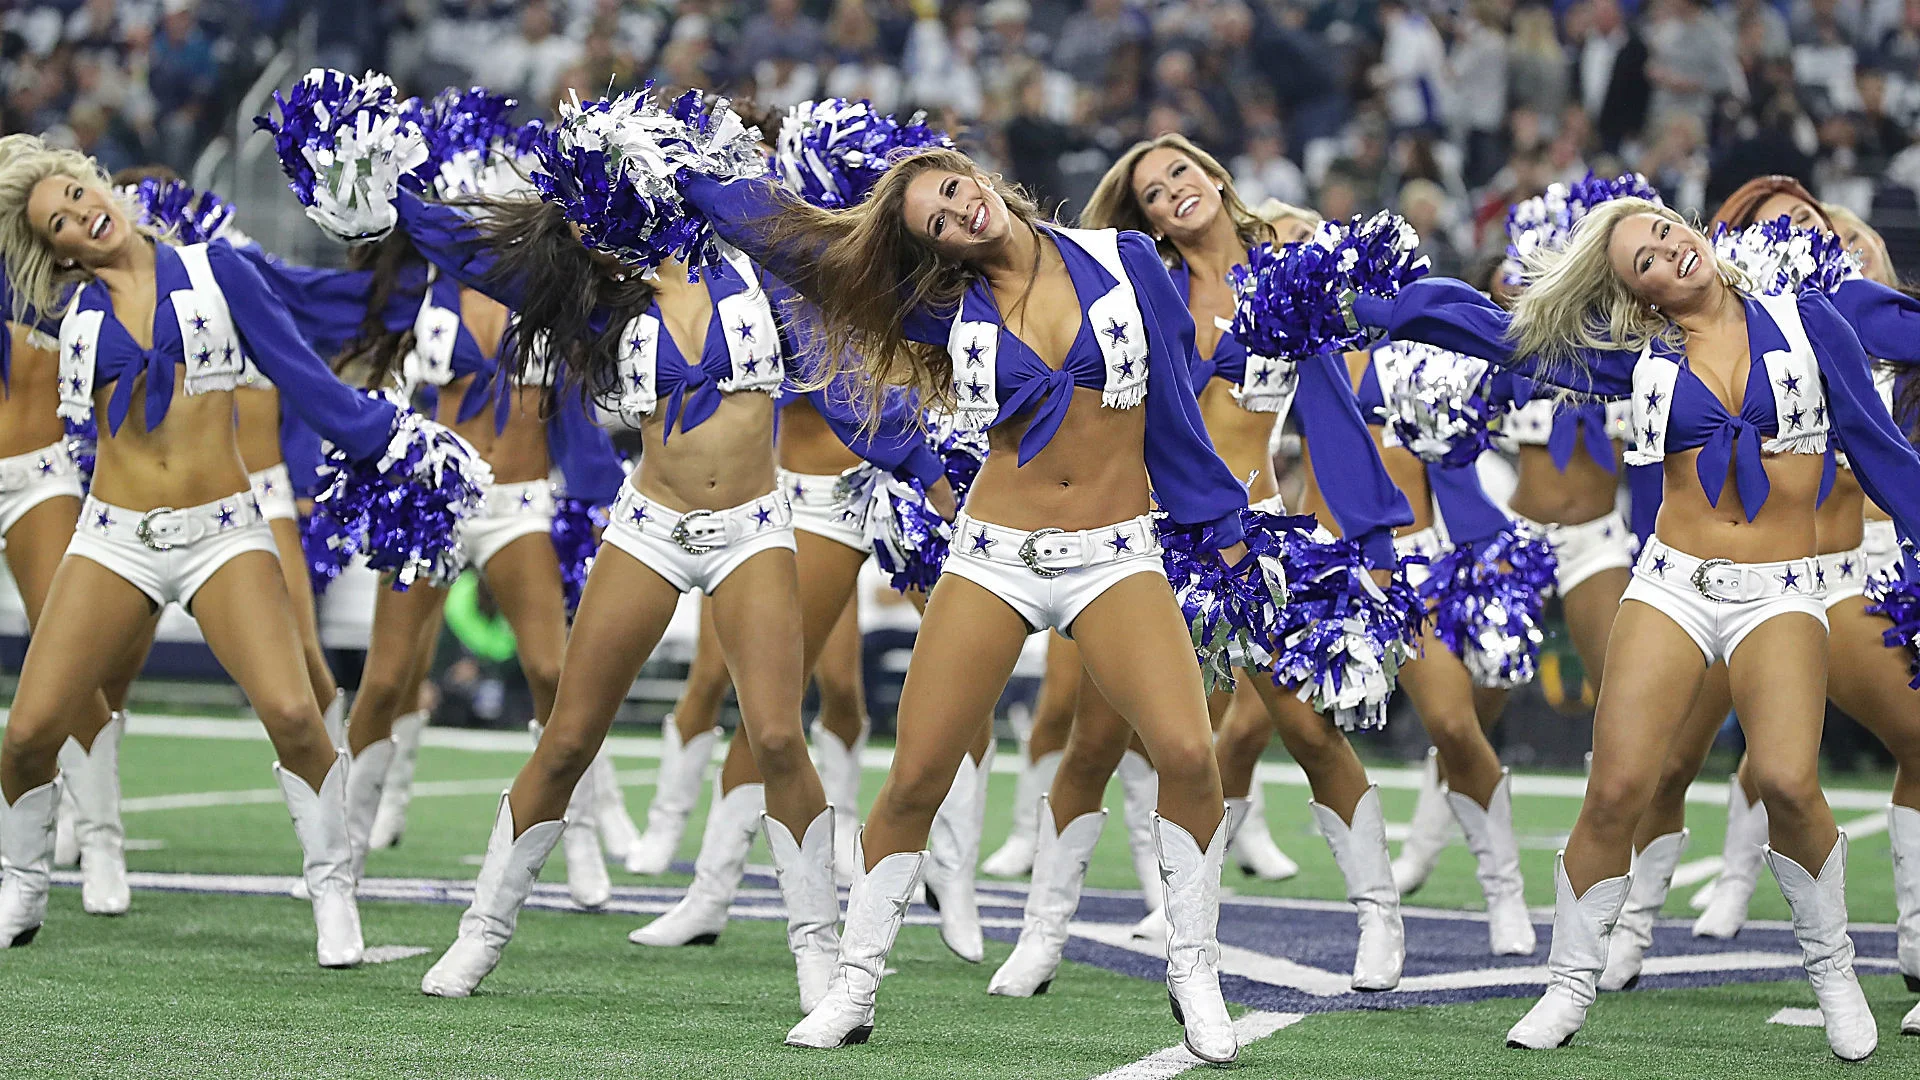 NFL players union League should pay cheerleaders fairly NFL Sporting News